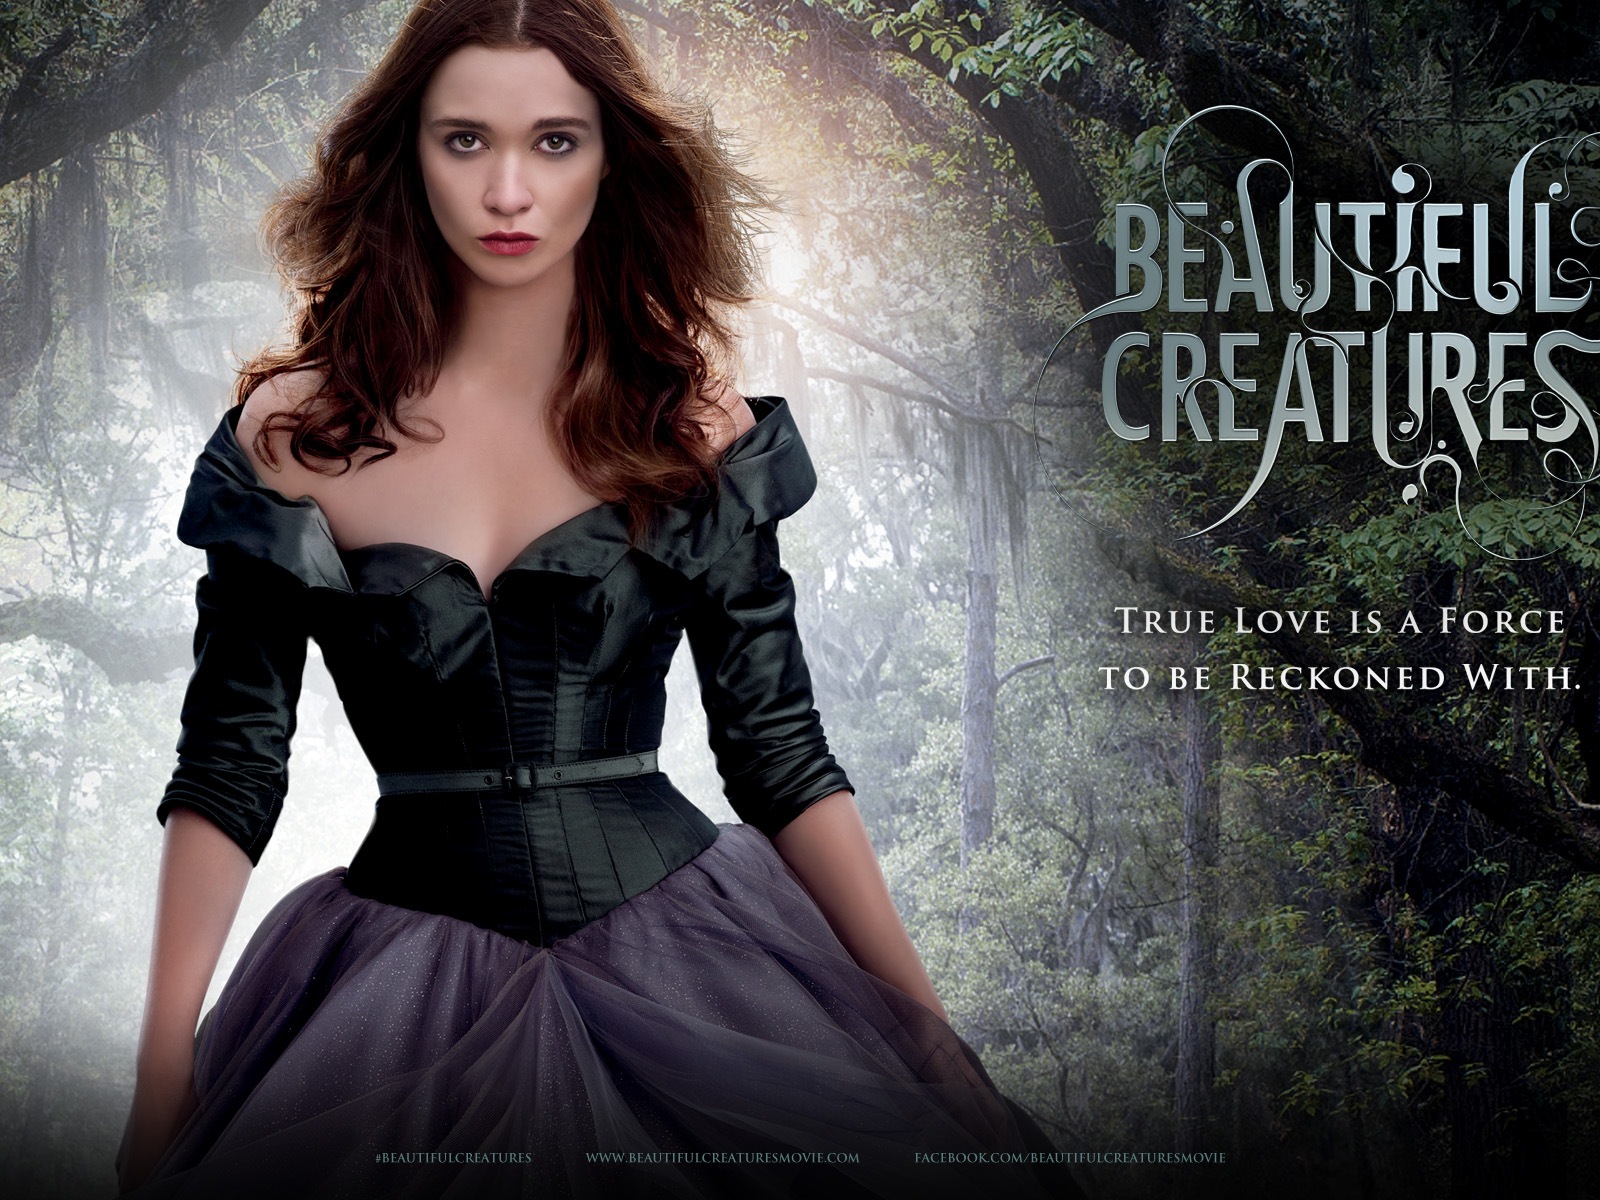 Beautiful Creatures 2013 HD movie wallpapers #7 - 1600x1200